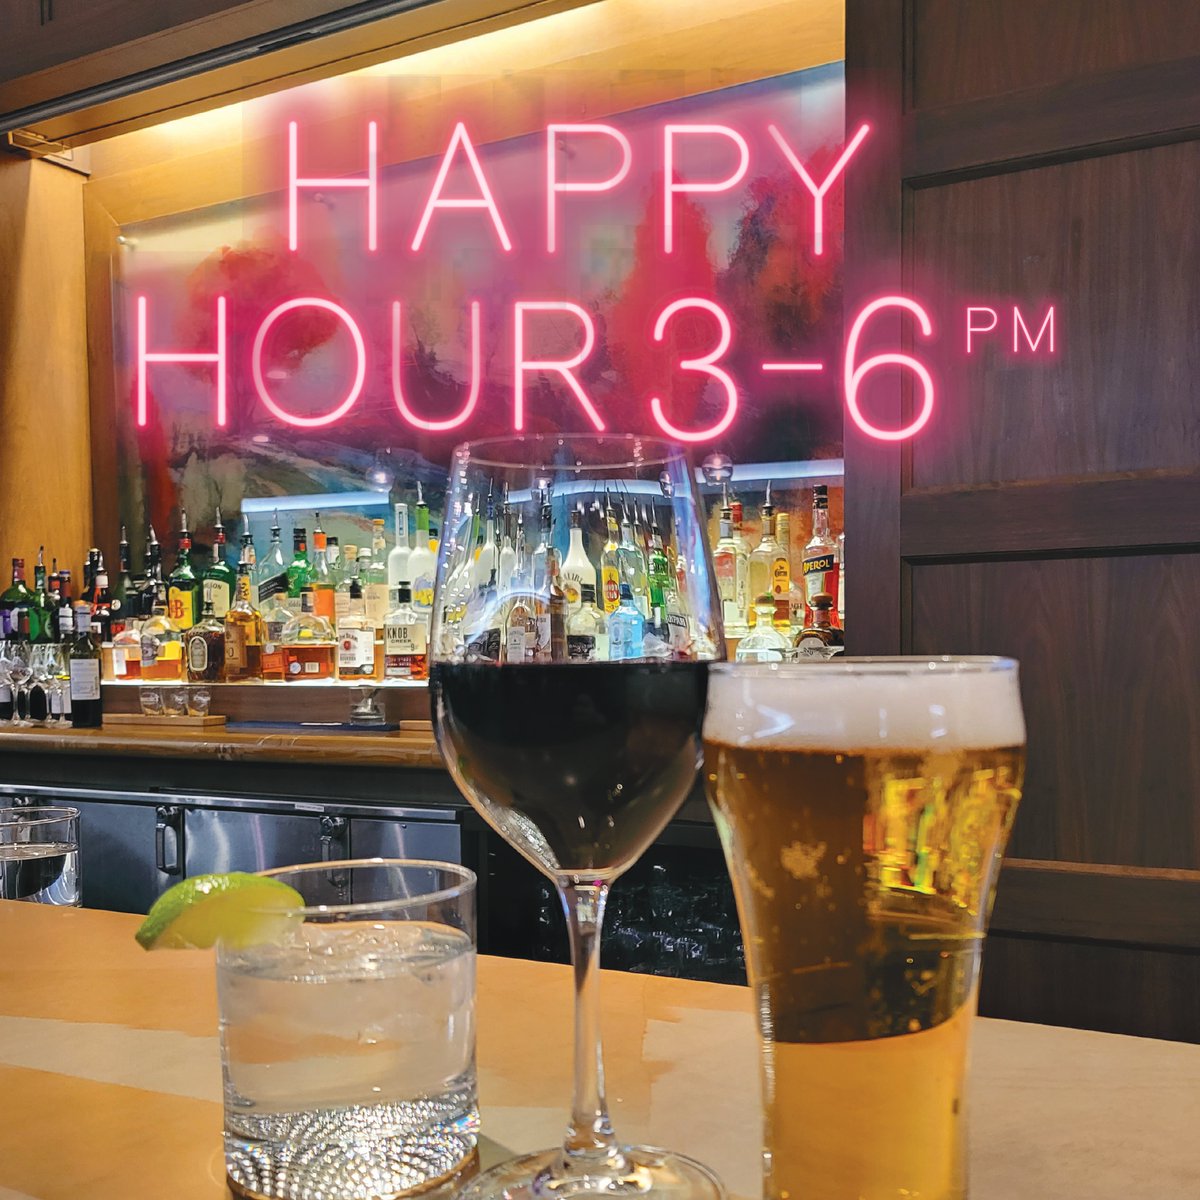 Meet you for #happyhour from 3-6 pm at #SpiritsBar andLounge located in the @SheratonParkway lobby. $5 Glass of House Wine (6 oz), $5 Domestic Draught Beer (16 oz), $5 Bar Rail (1 oz). All prices subject to taxes.